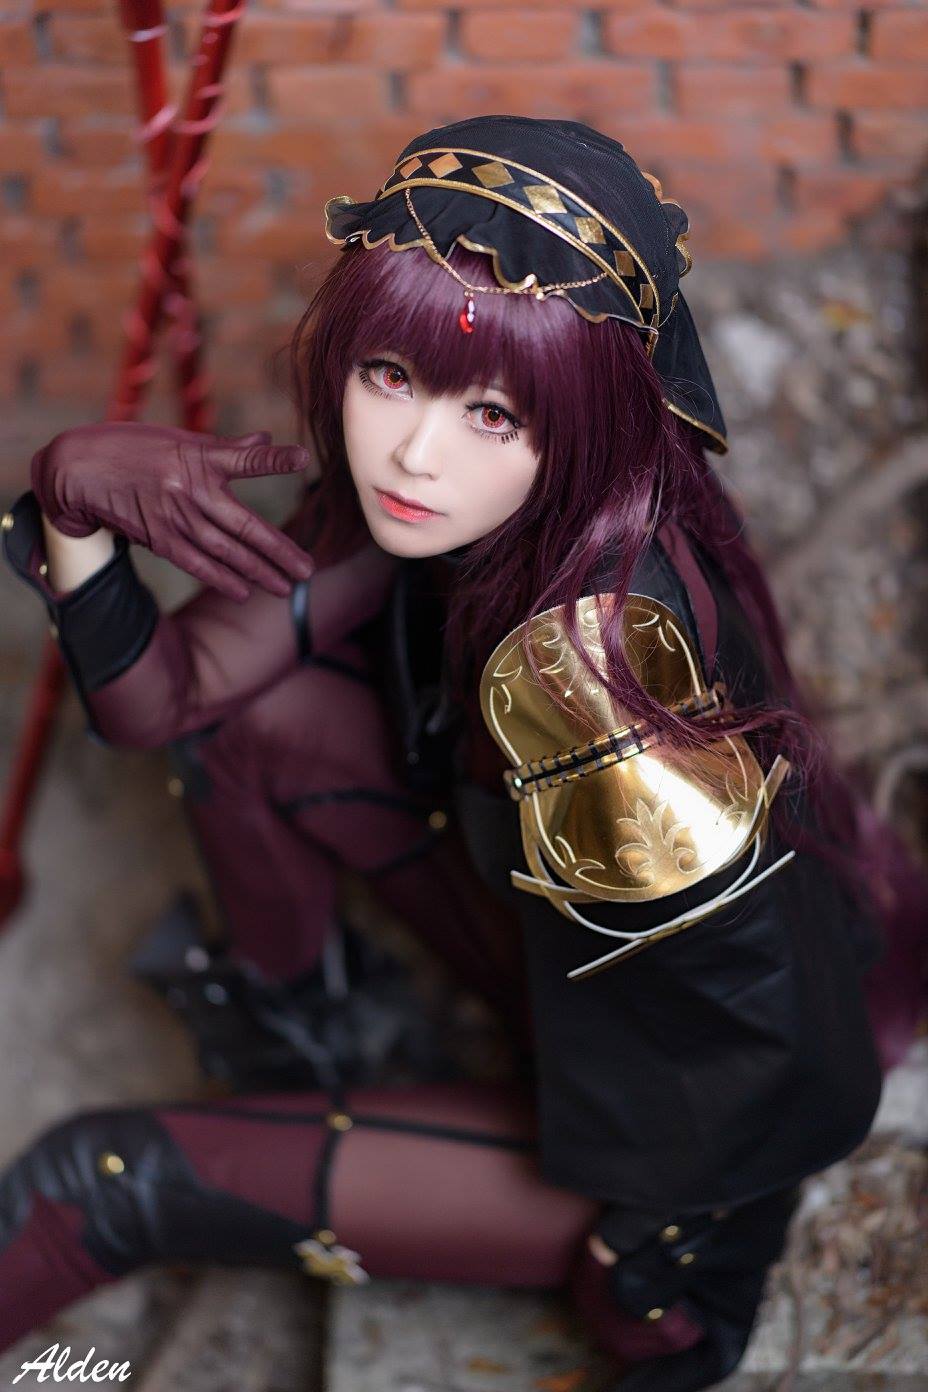 Arty as Scáthach from 'Fate/Grand Order' | Arty from Taiwan | MANGA.TOKYO World Cosplayers | Artyさん／『Fate/Grand Order』スカサハ